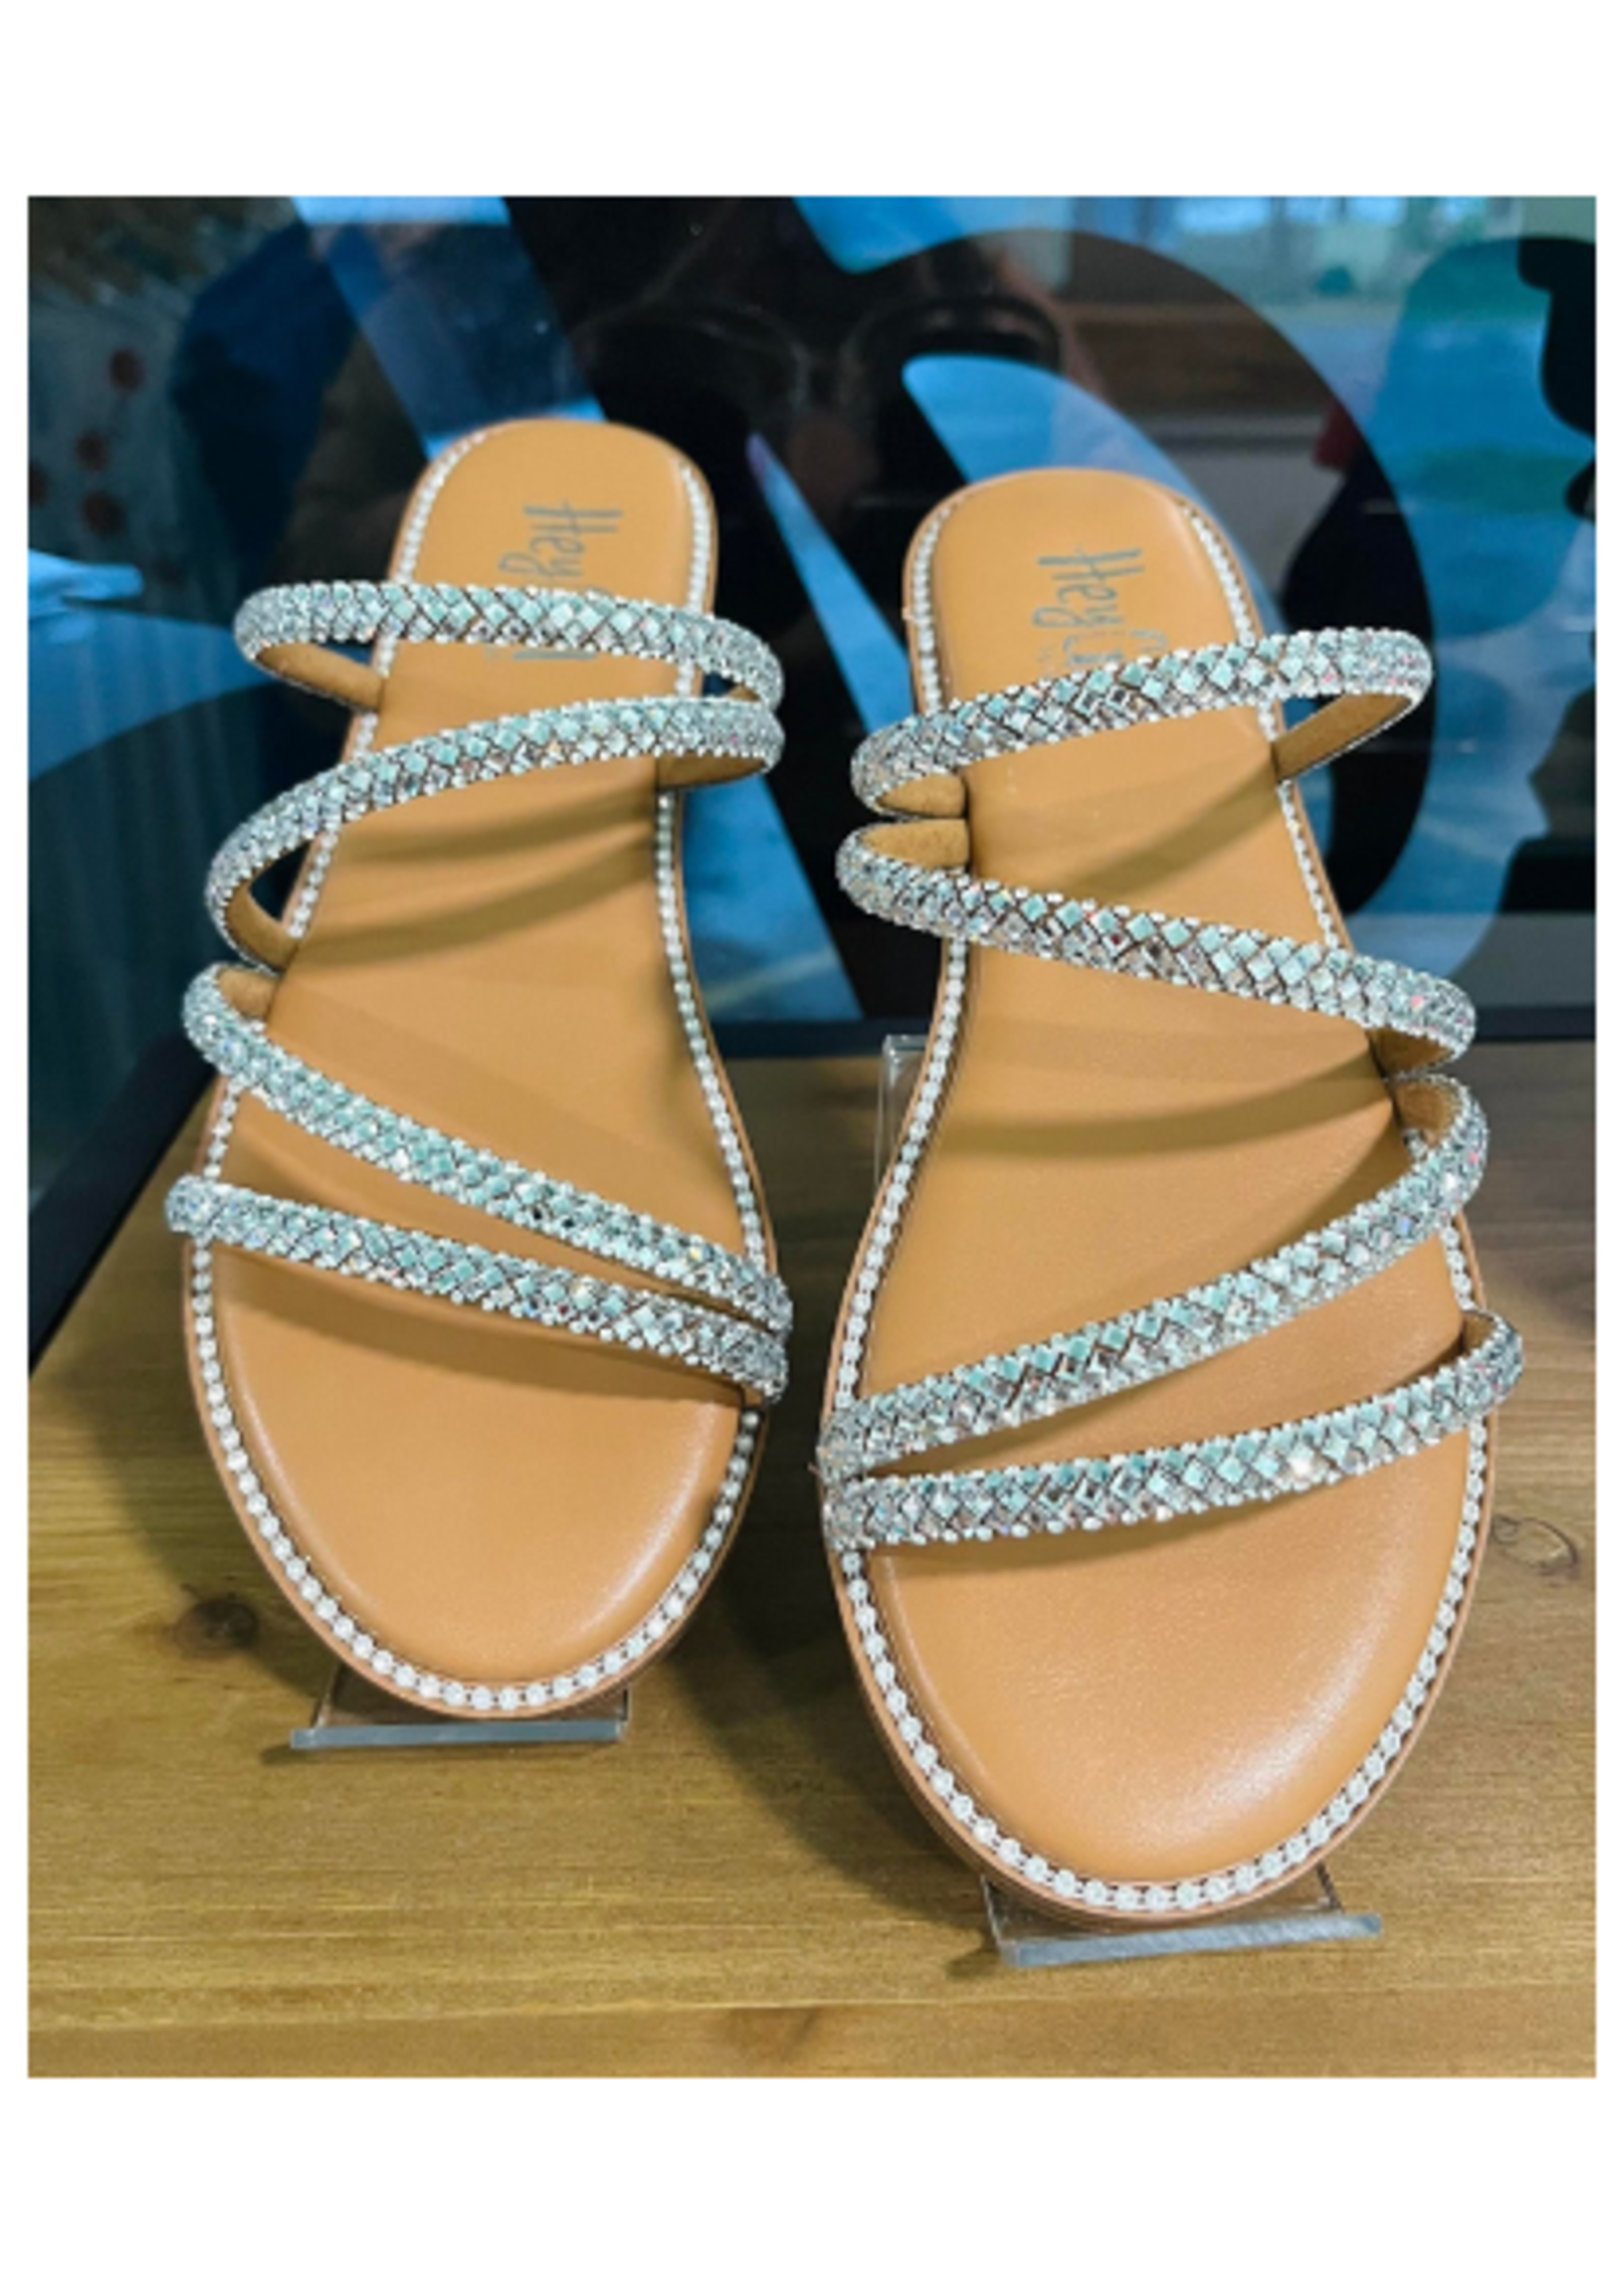 Shell Yeah Sandals - Clear